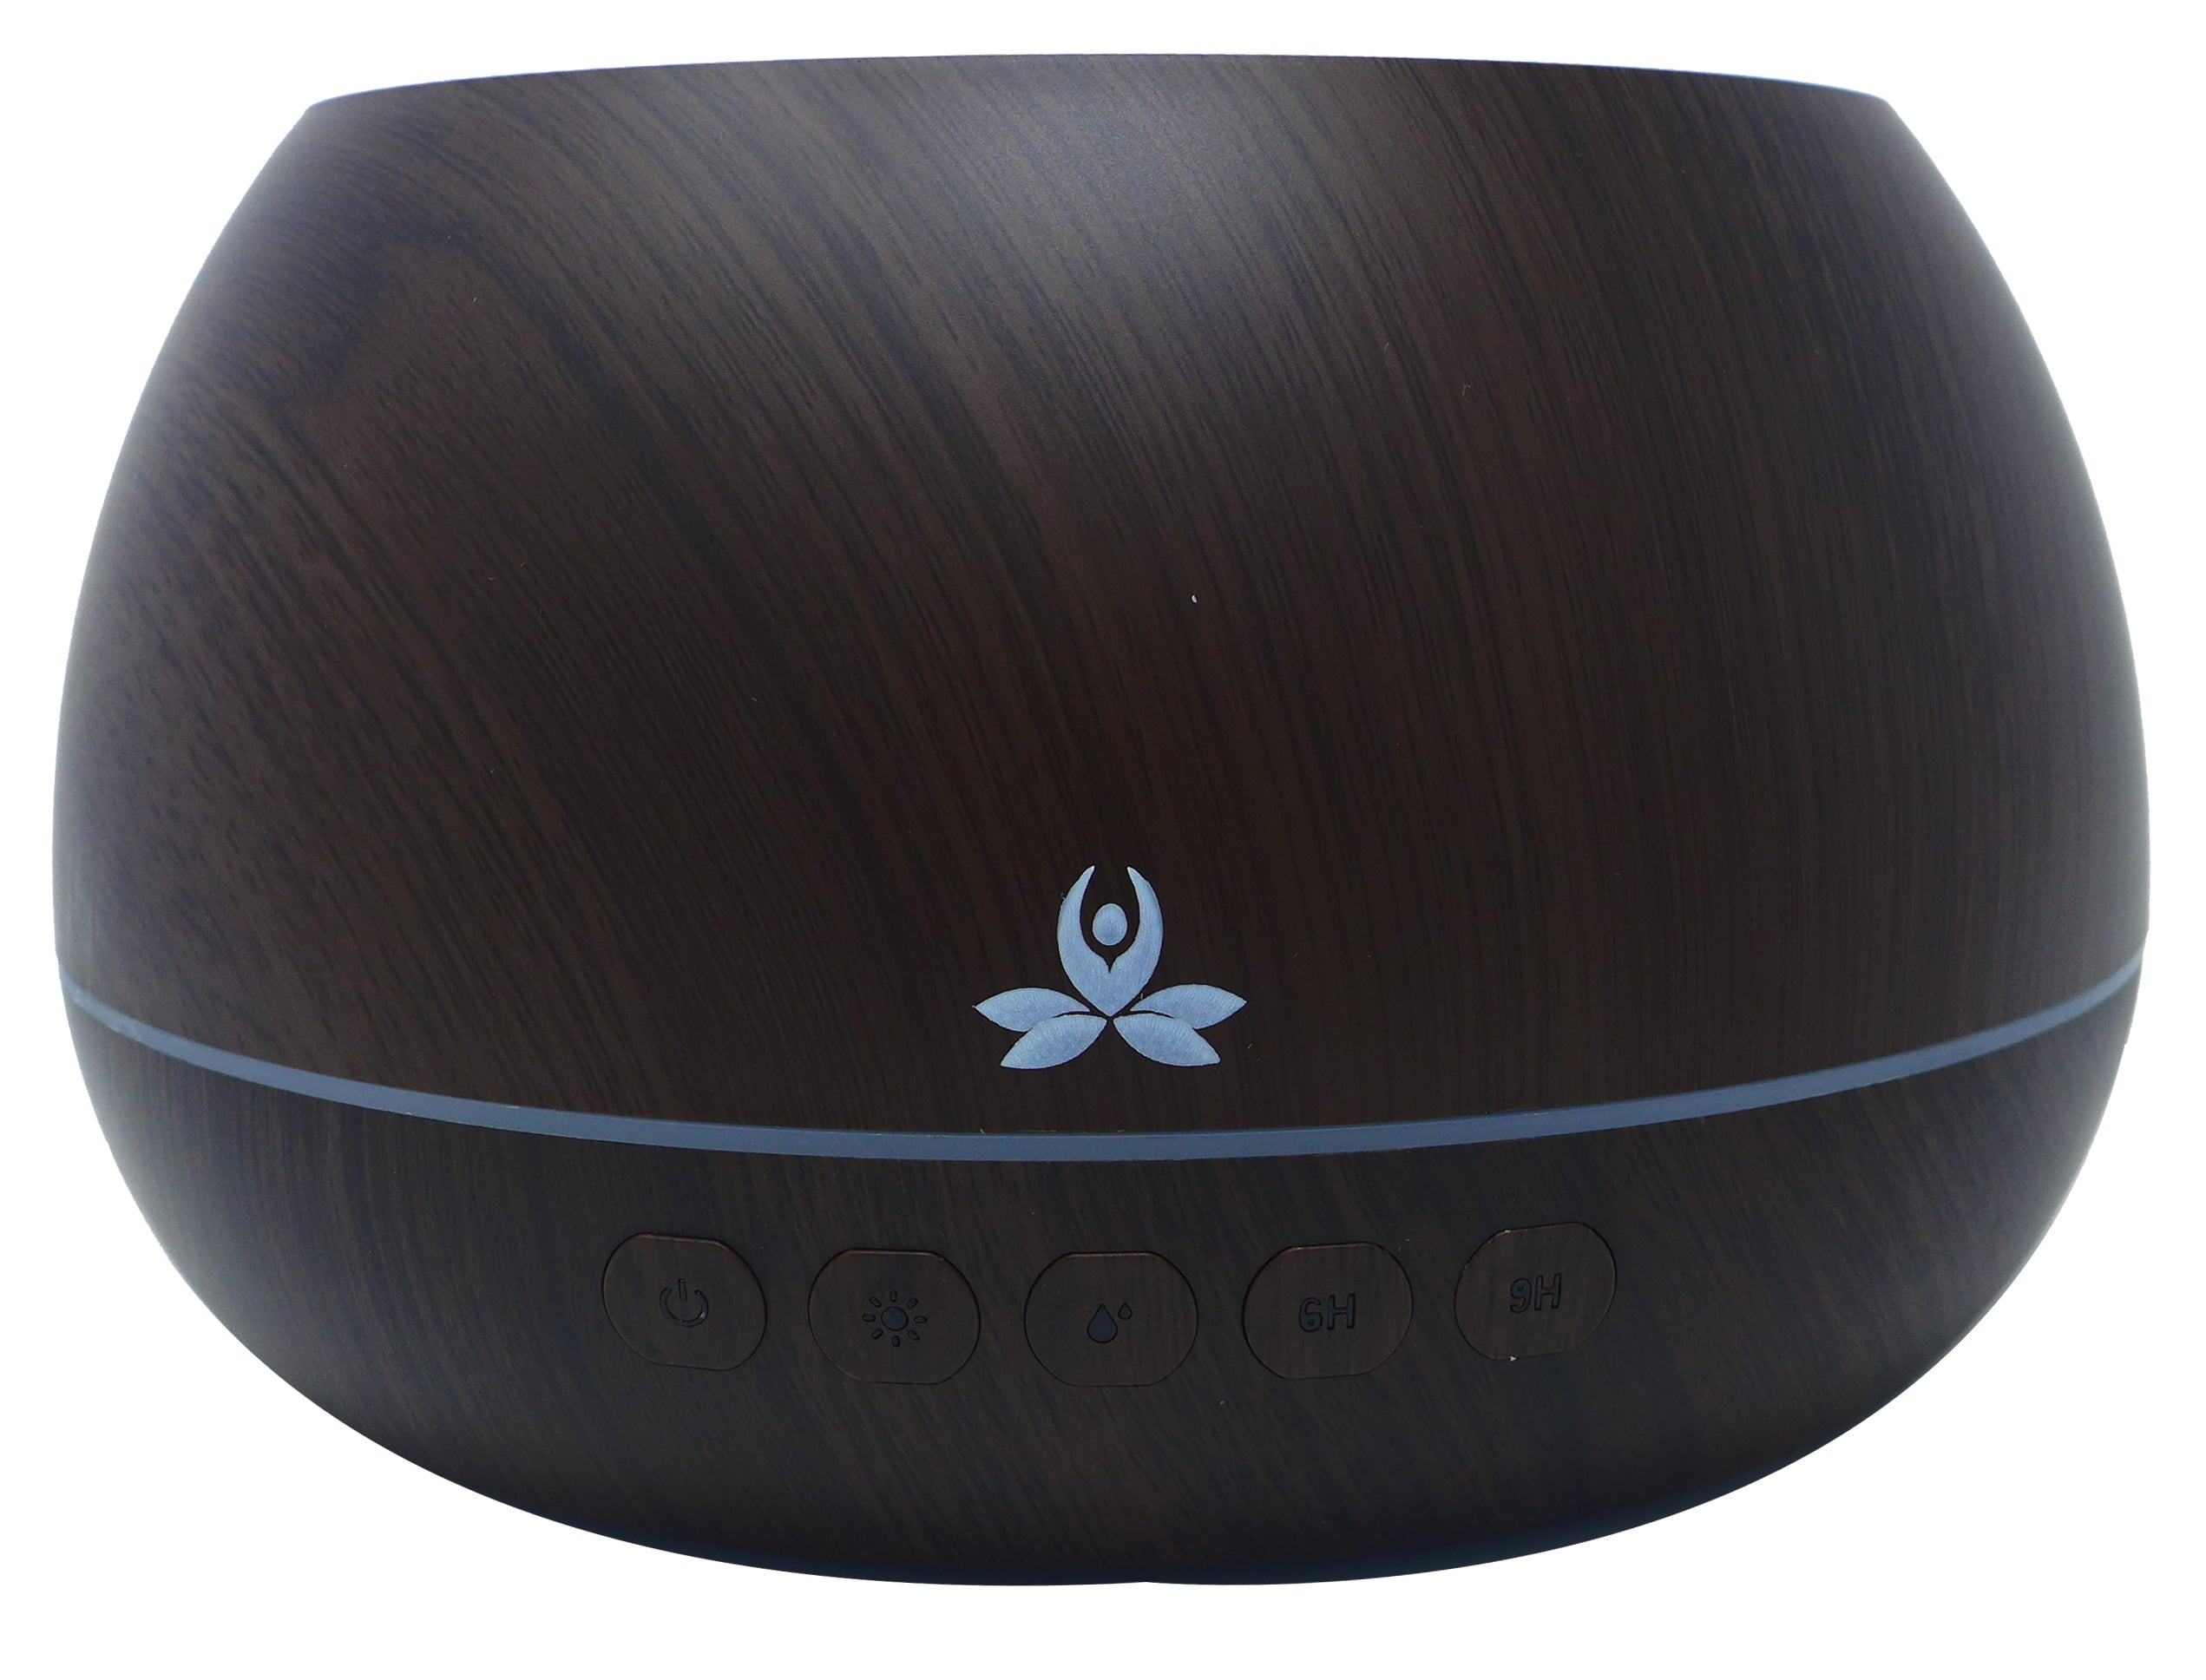 Essential Oil Diffuser For Large Spaces (MAHAN) Electronic Diffuser Dark brown 